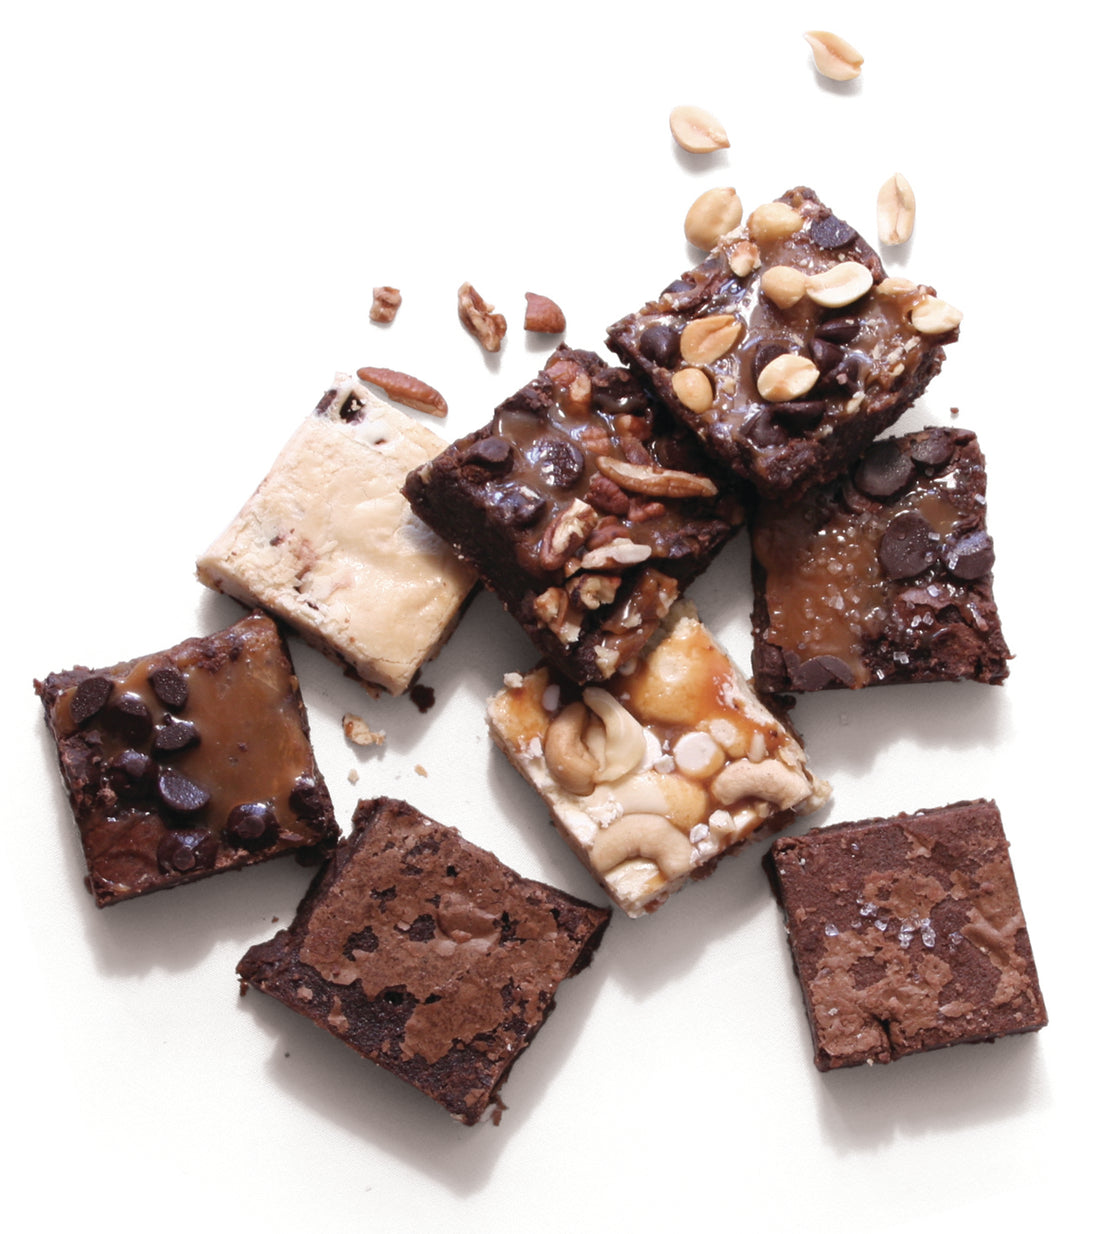 How to make your Brownies Healthy: Gluten Free, Vegan, and Dairy Free Substitutions